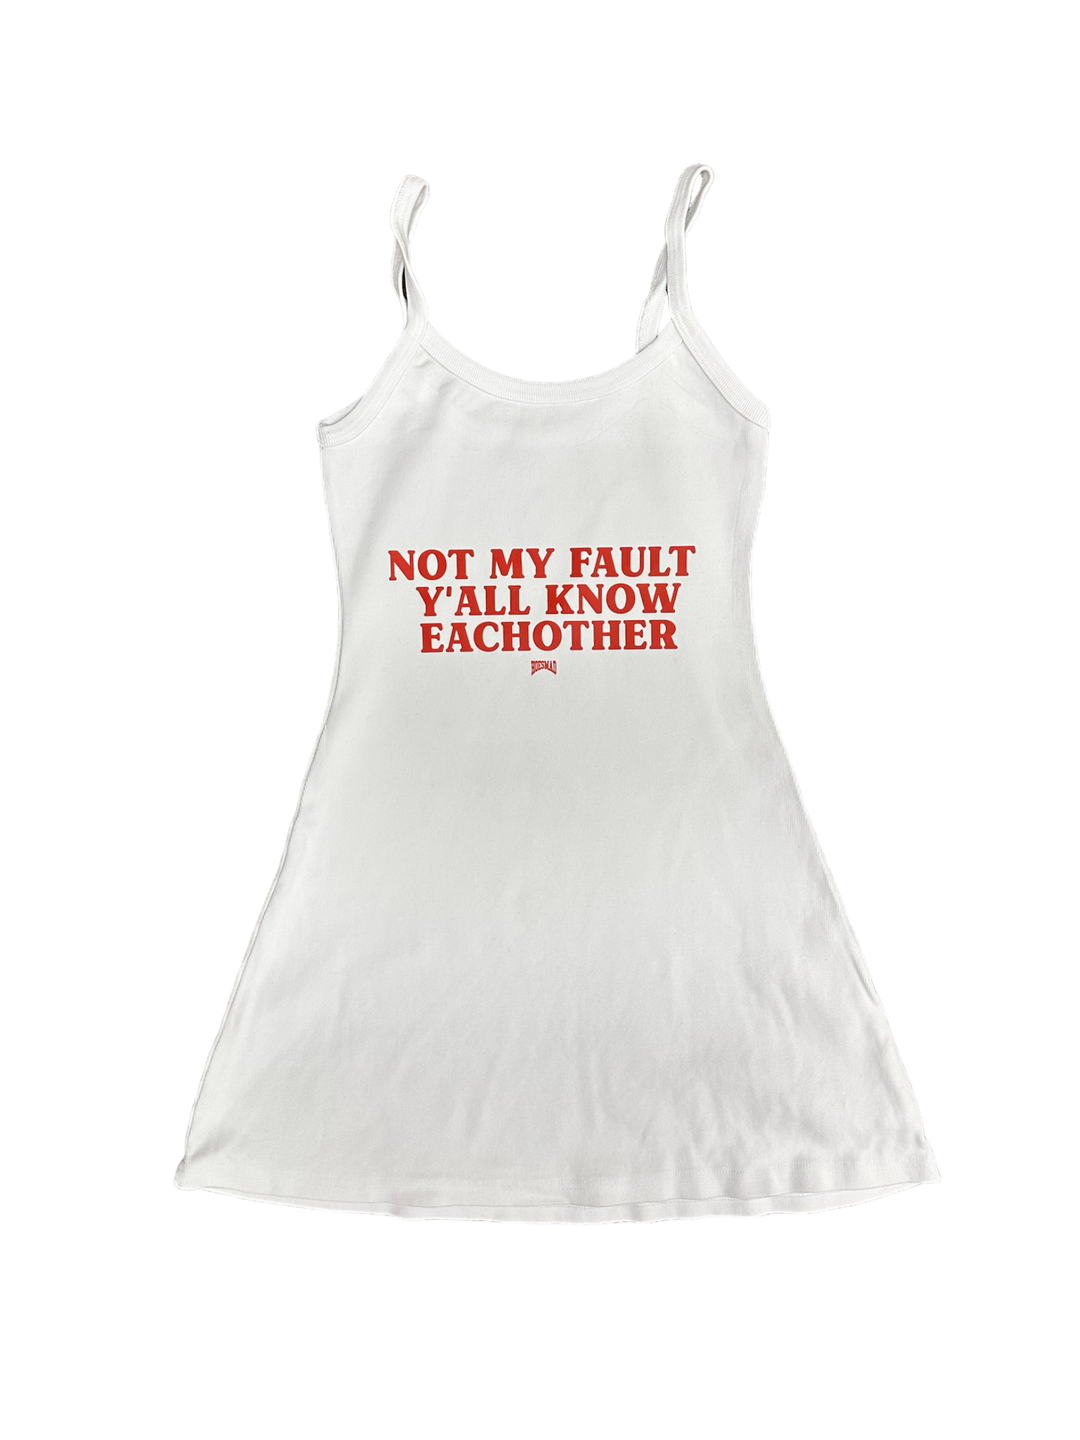 NOT MY FAULT TENNIS DRESS - WHITE/RED